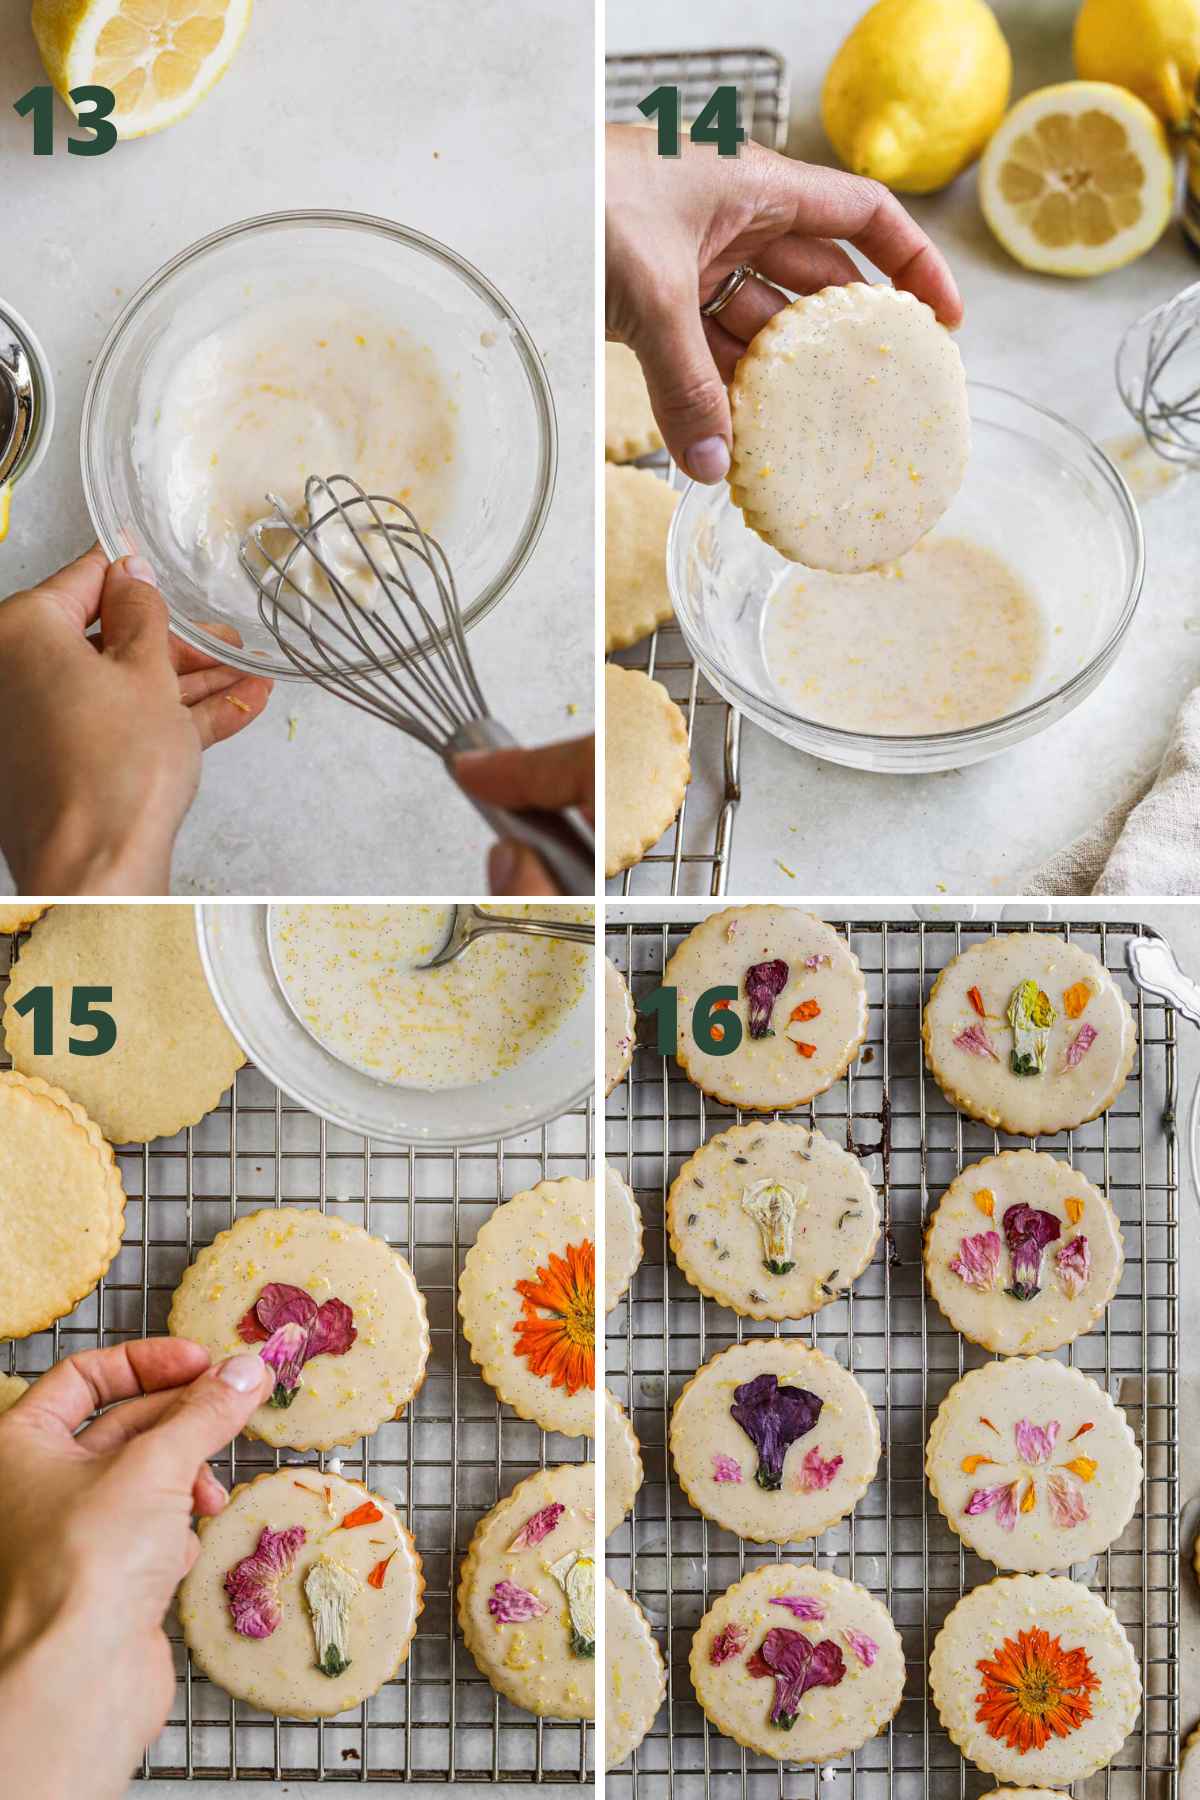 Steps to make edible flower shortbread, whisking powdered sugar, vanilla paste, lemon juice and zest for glaze, dipping cookies, and placing dried edible flowers on top.